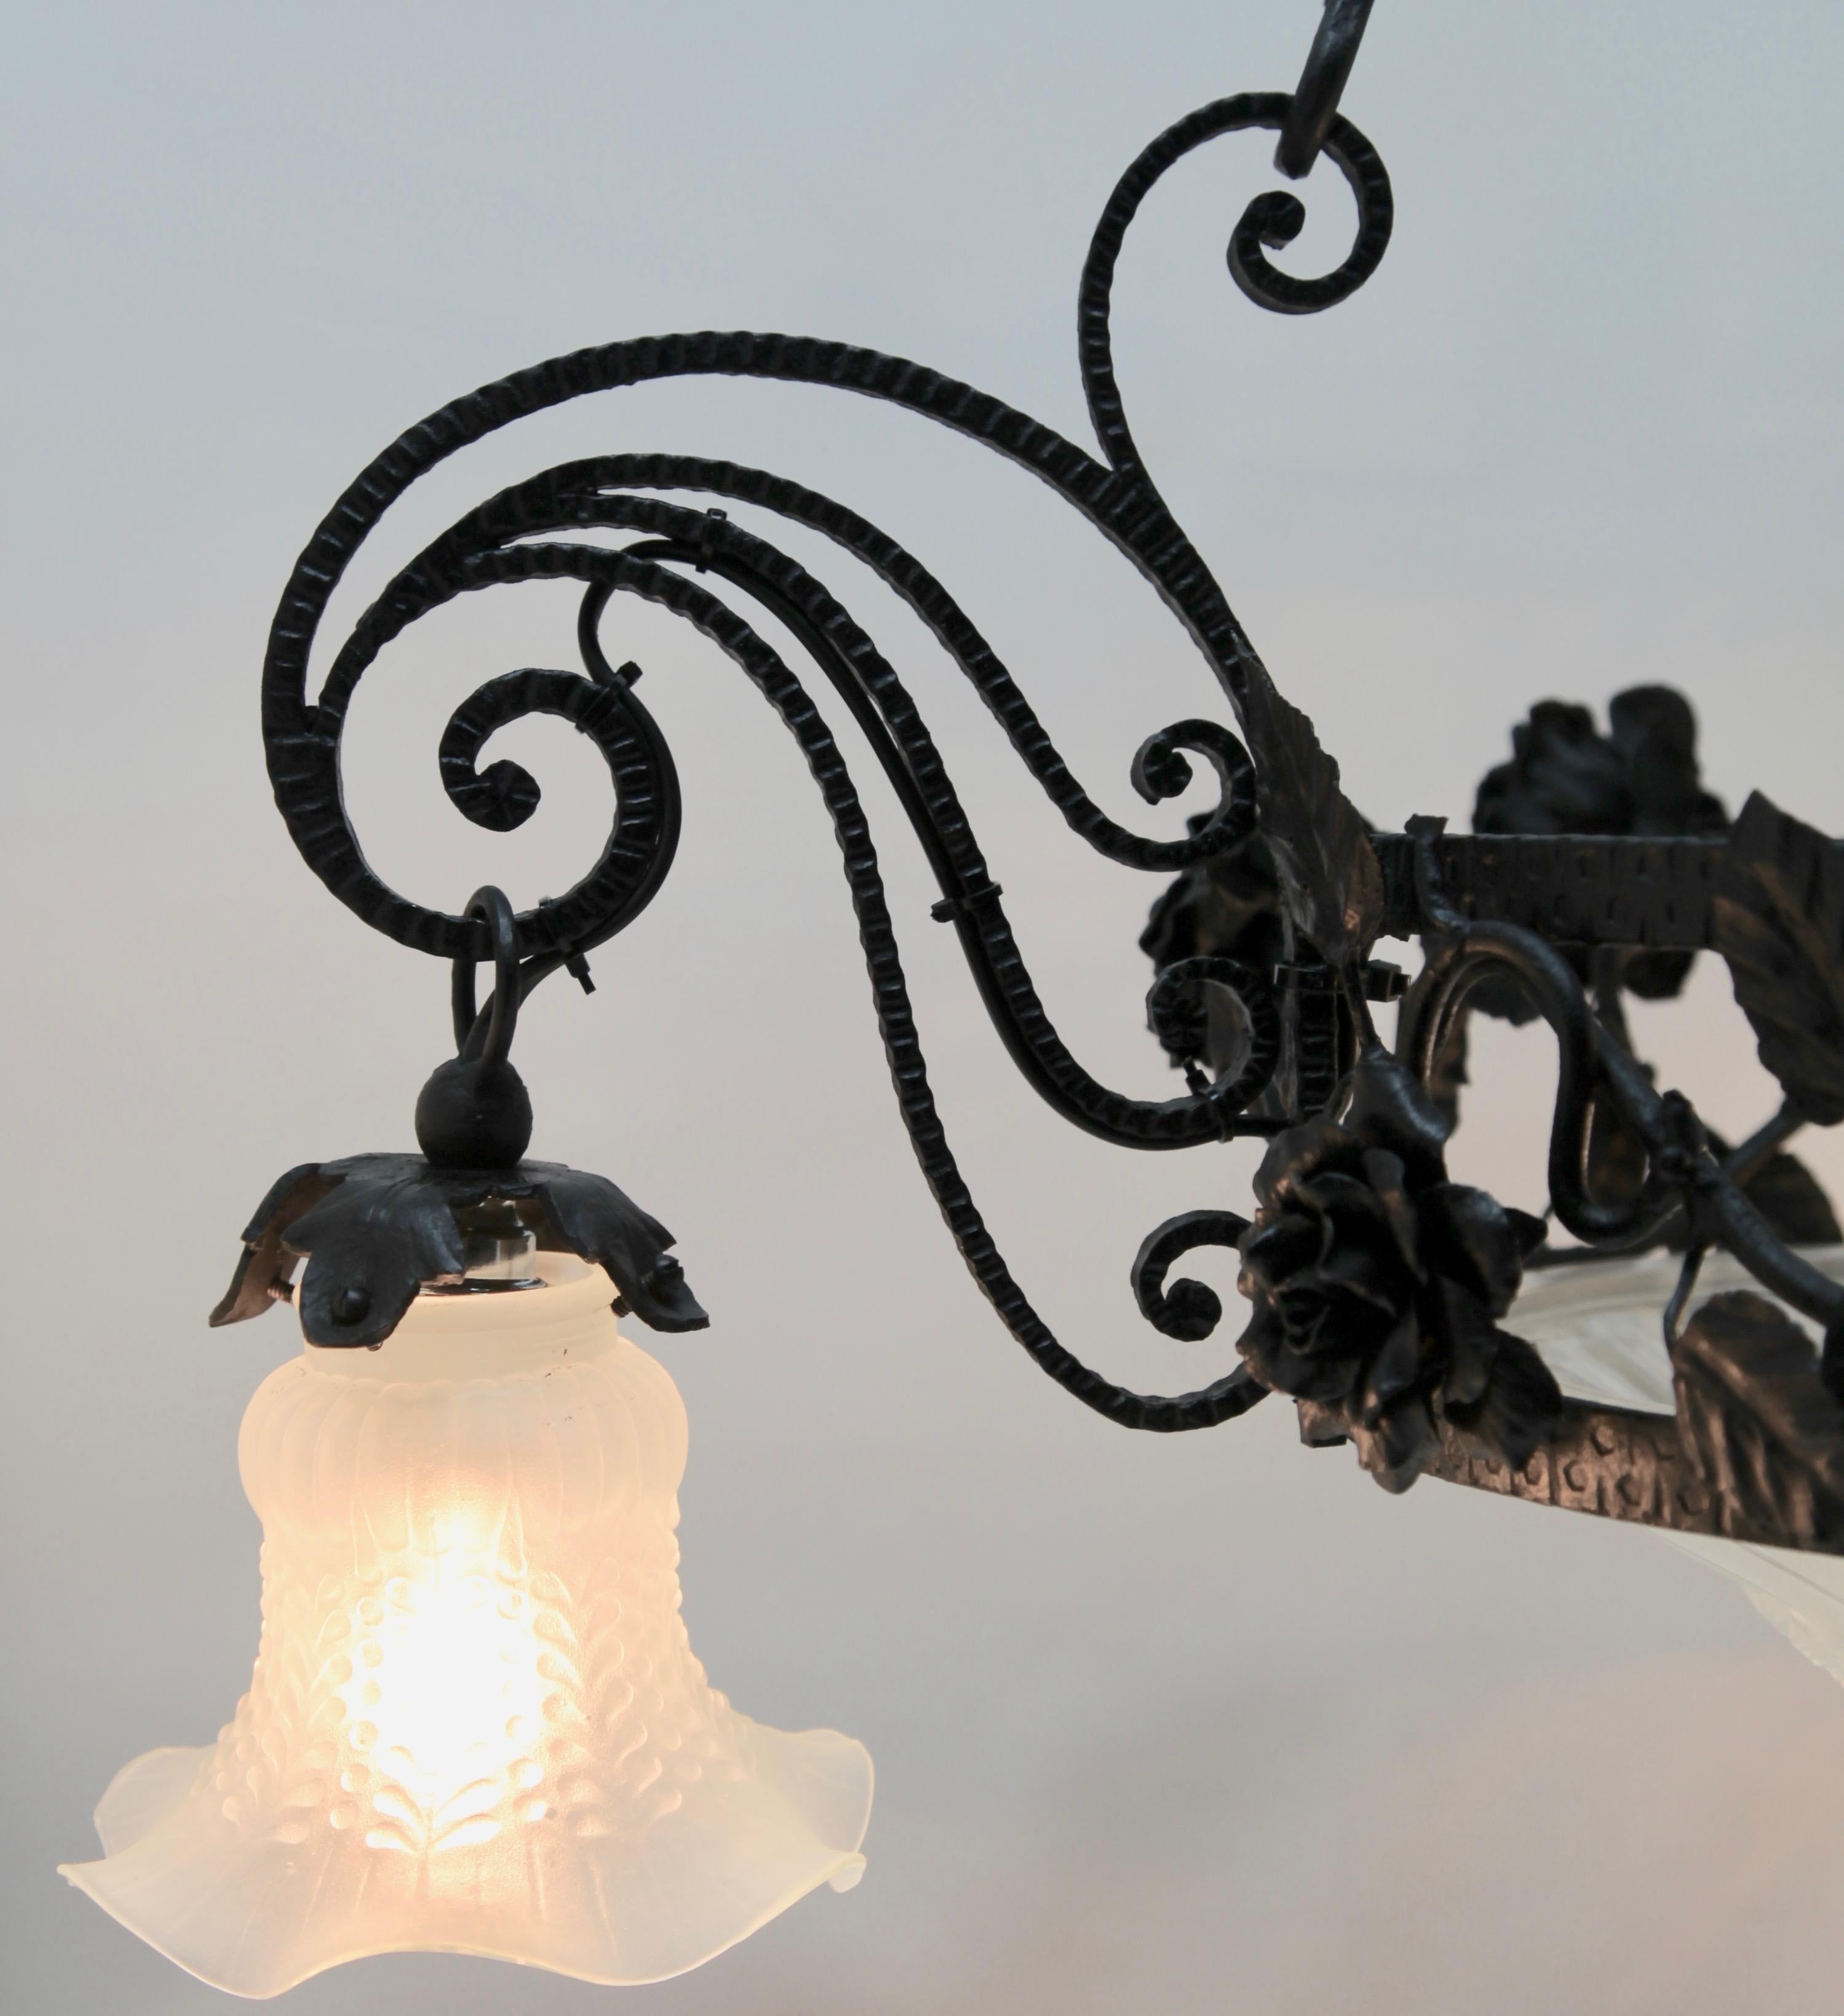 Art Nouveau forget metal floral decor chandelier Luneville, 1900s.

Photography fails to capture the simple elegant illumination provided by this lamp.

In excellent condition and in full working order having recently been re-wired and provided with